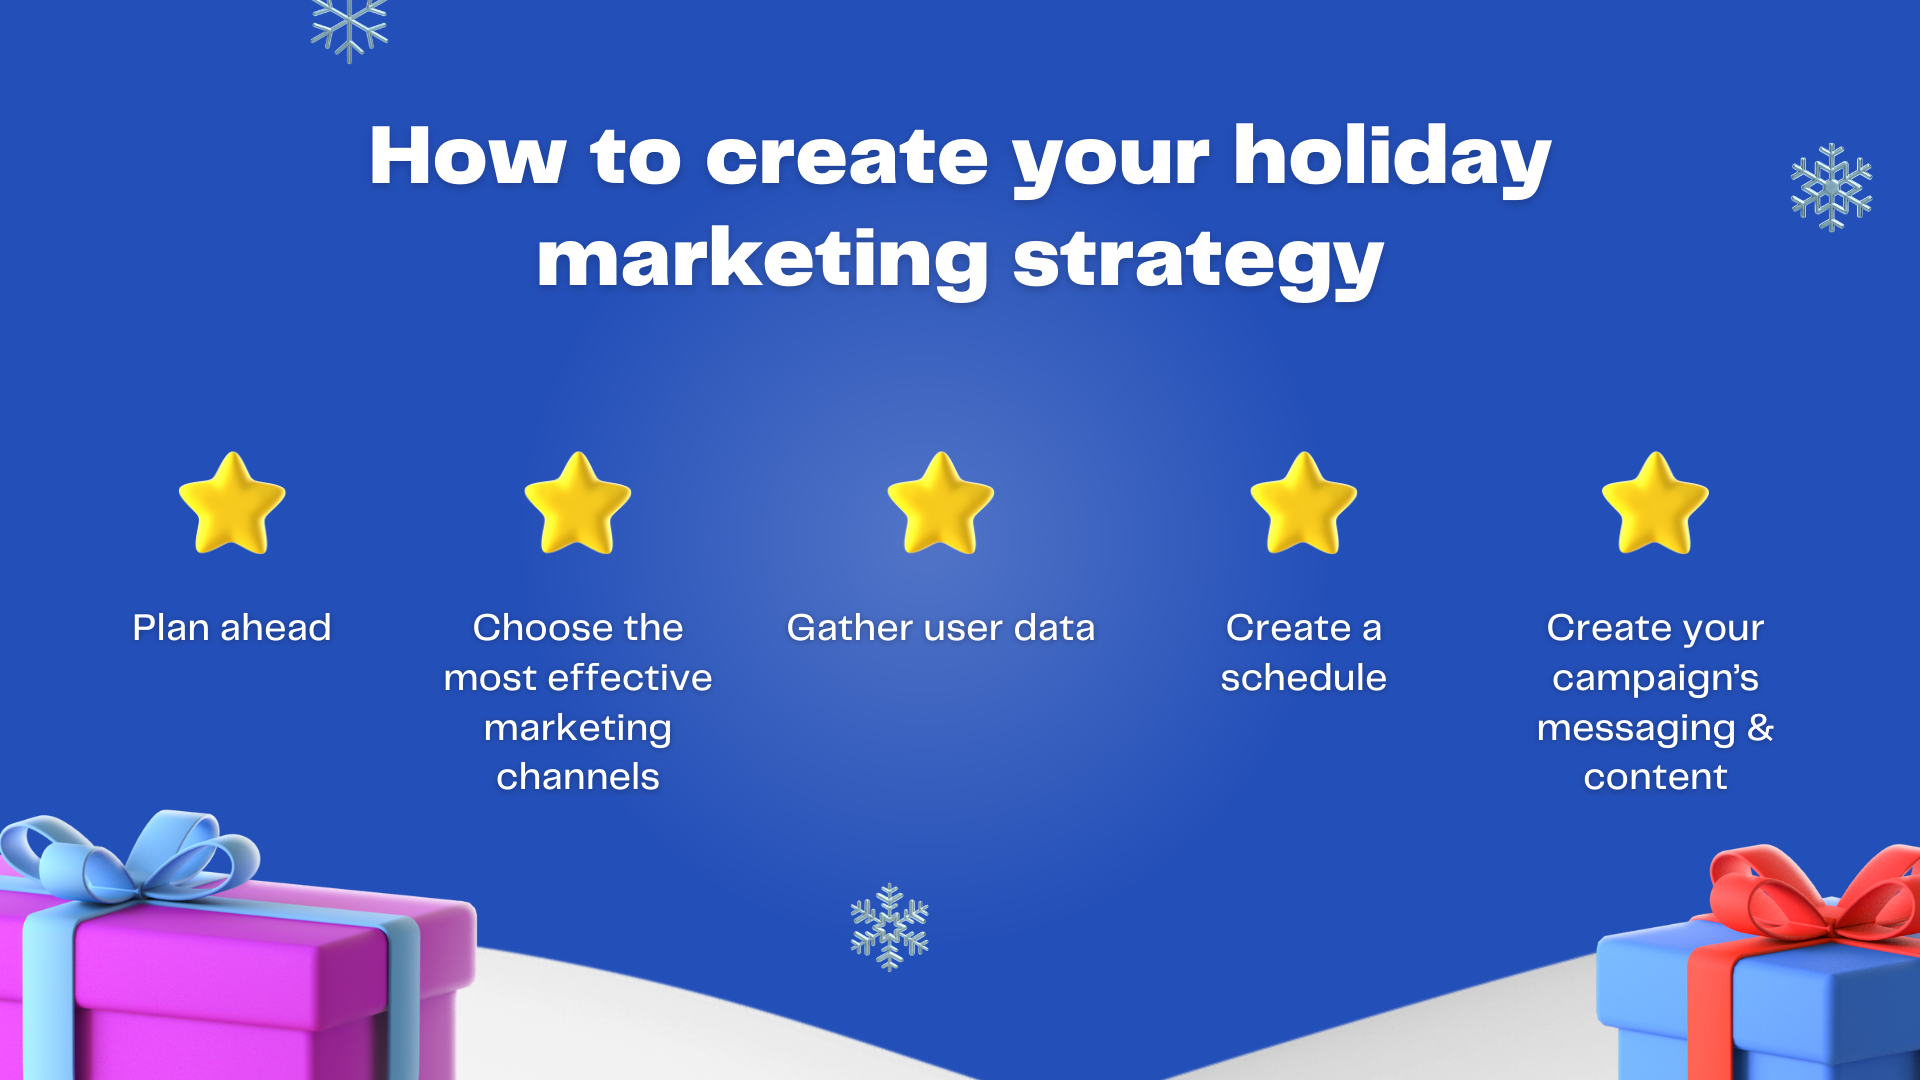 How to create your holiday marketing strategy